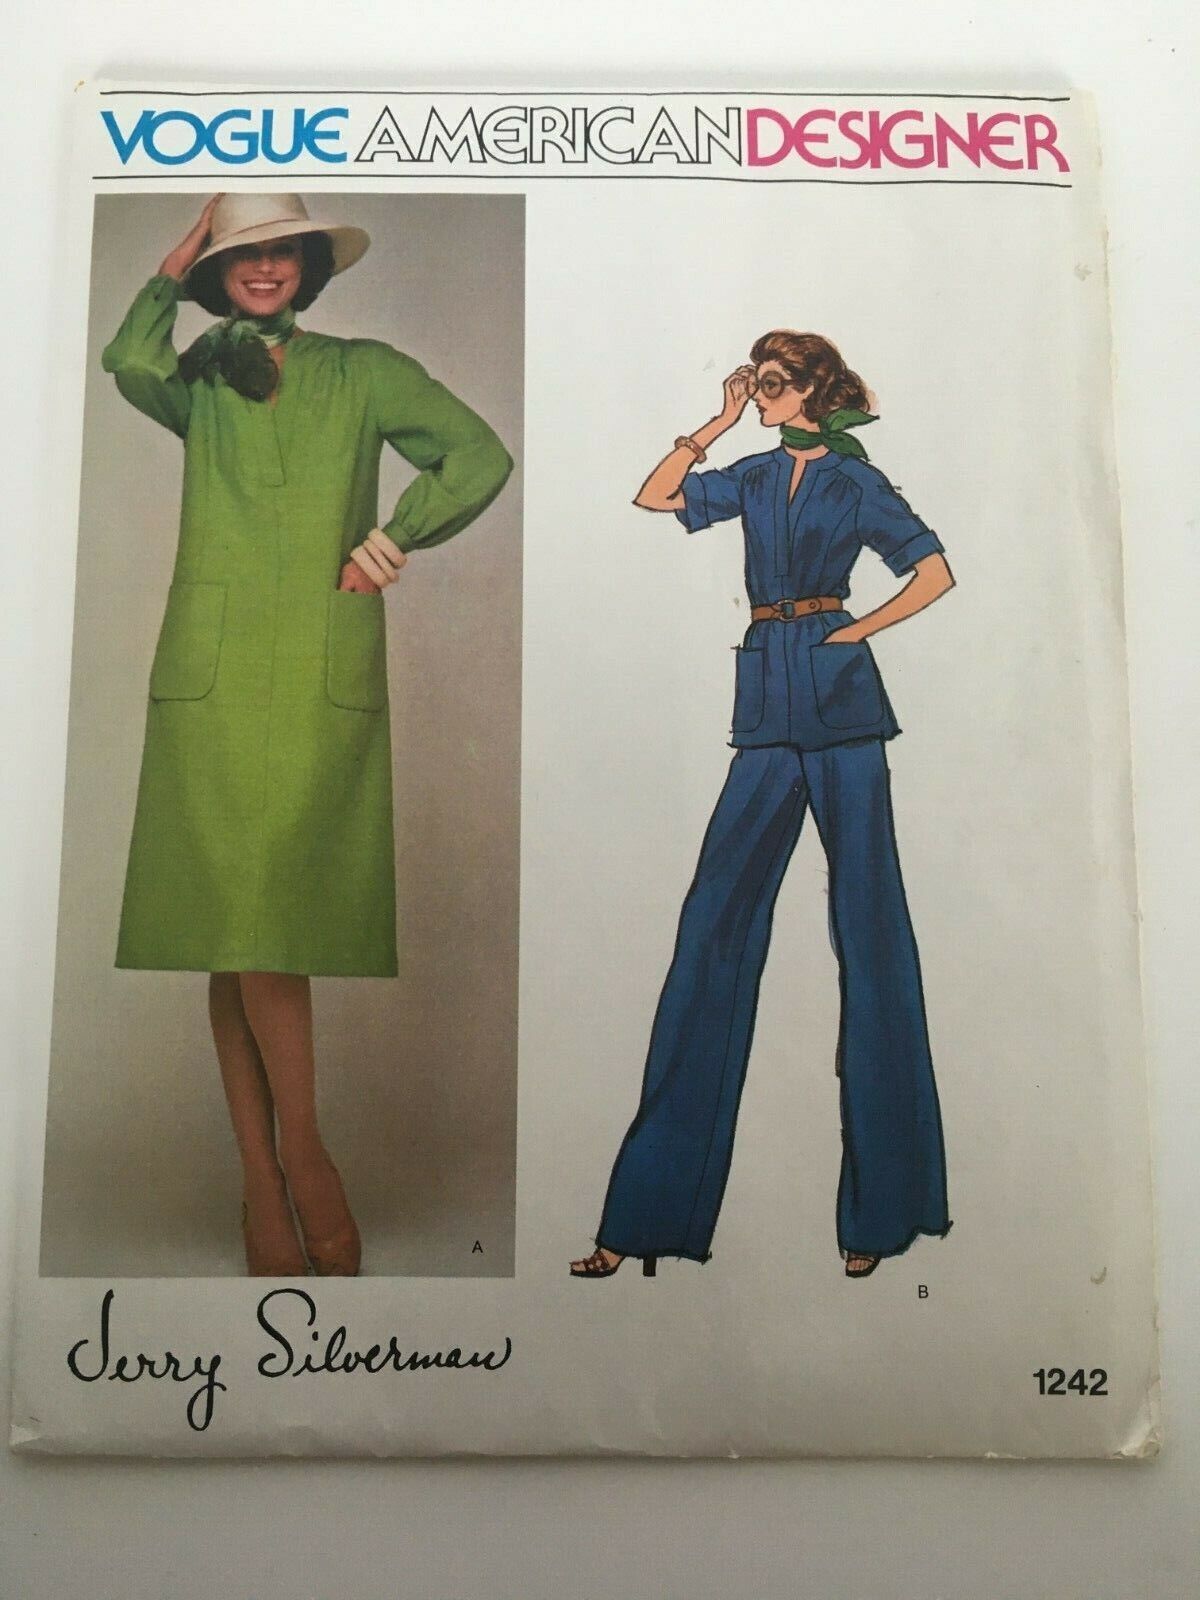 Primary image for Vogue Sewing Pattern 1242 Jerry Silverman Sz 10  Dress Top Pant American Design